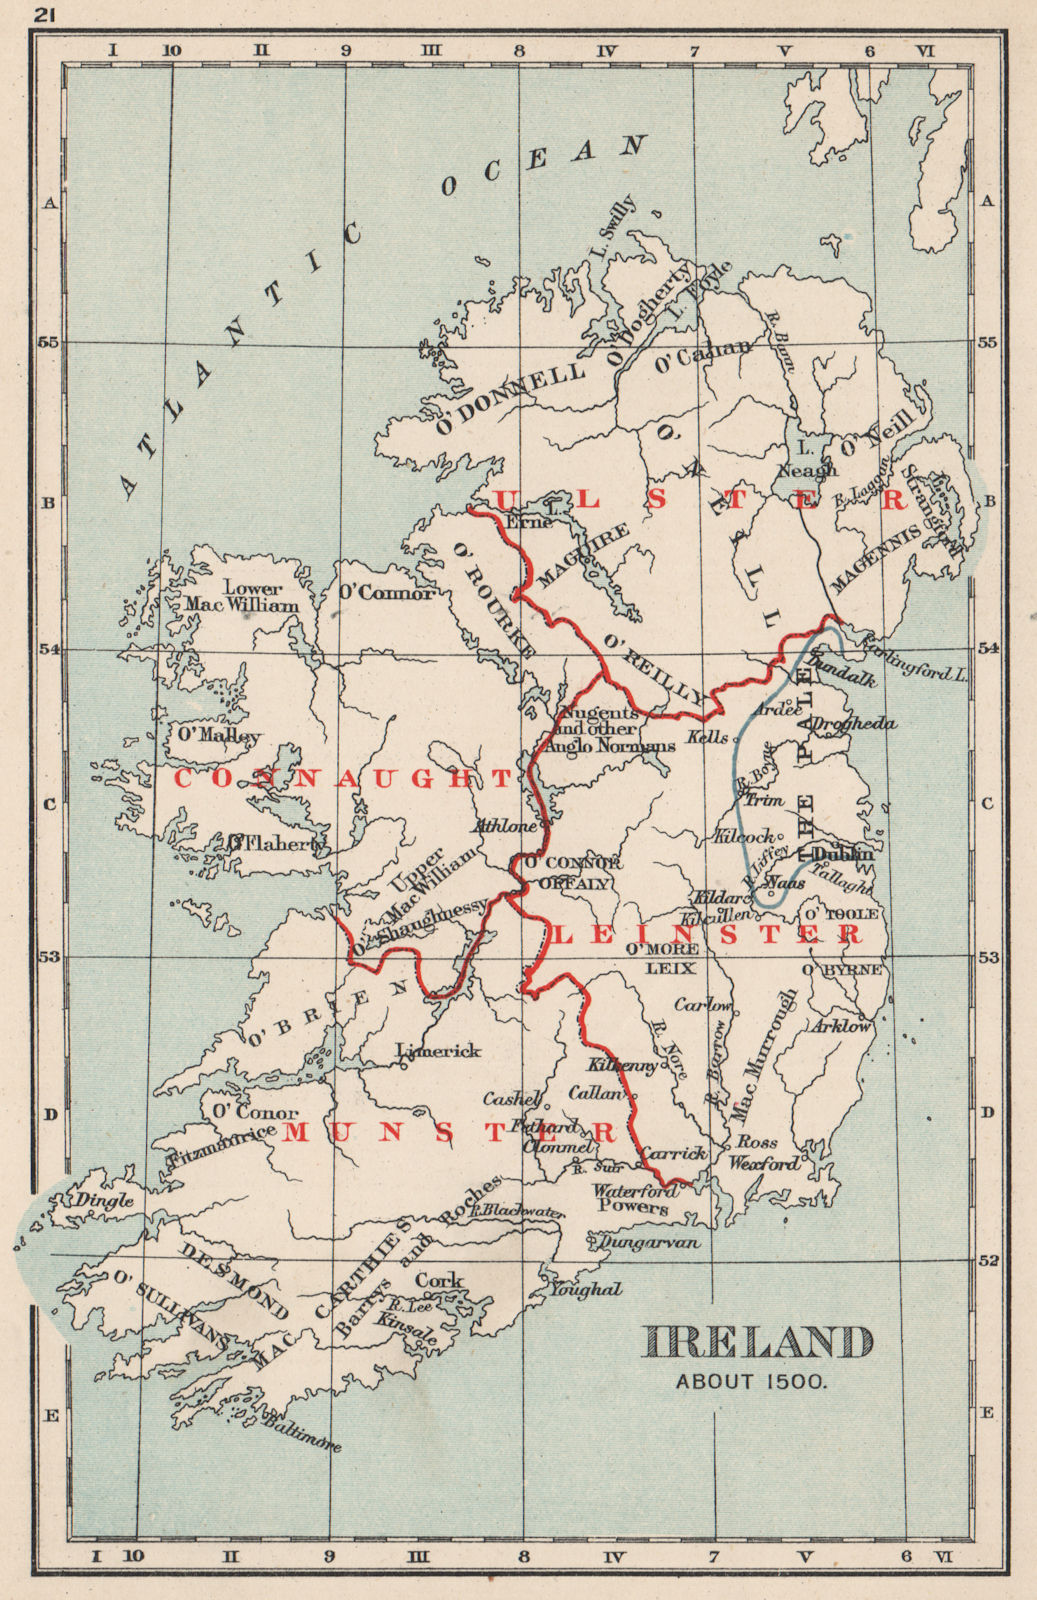 Associate Product IRELAND IN 1500. Showing clan names kingdoms "The Pale" provinces 1907 old map